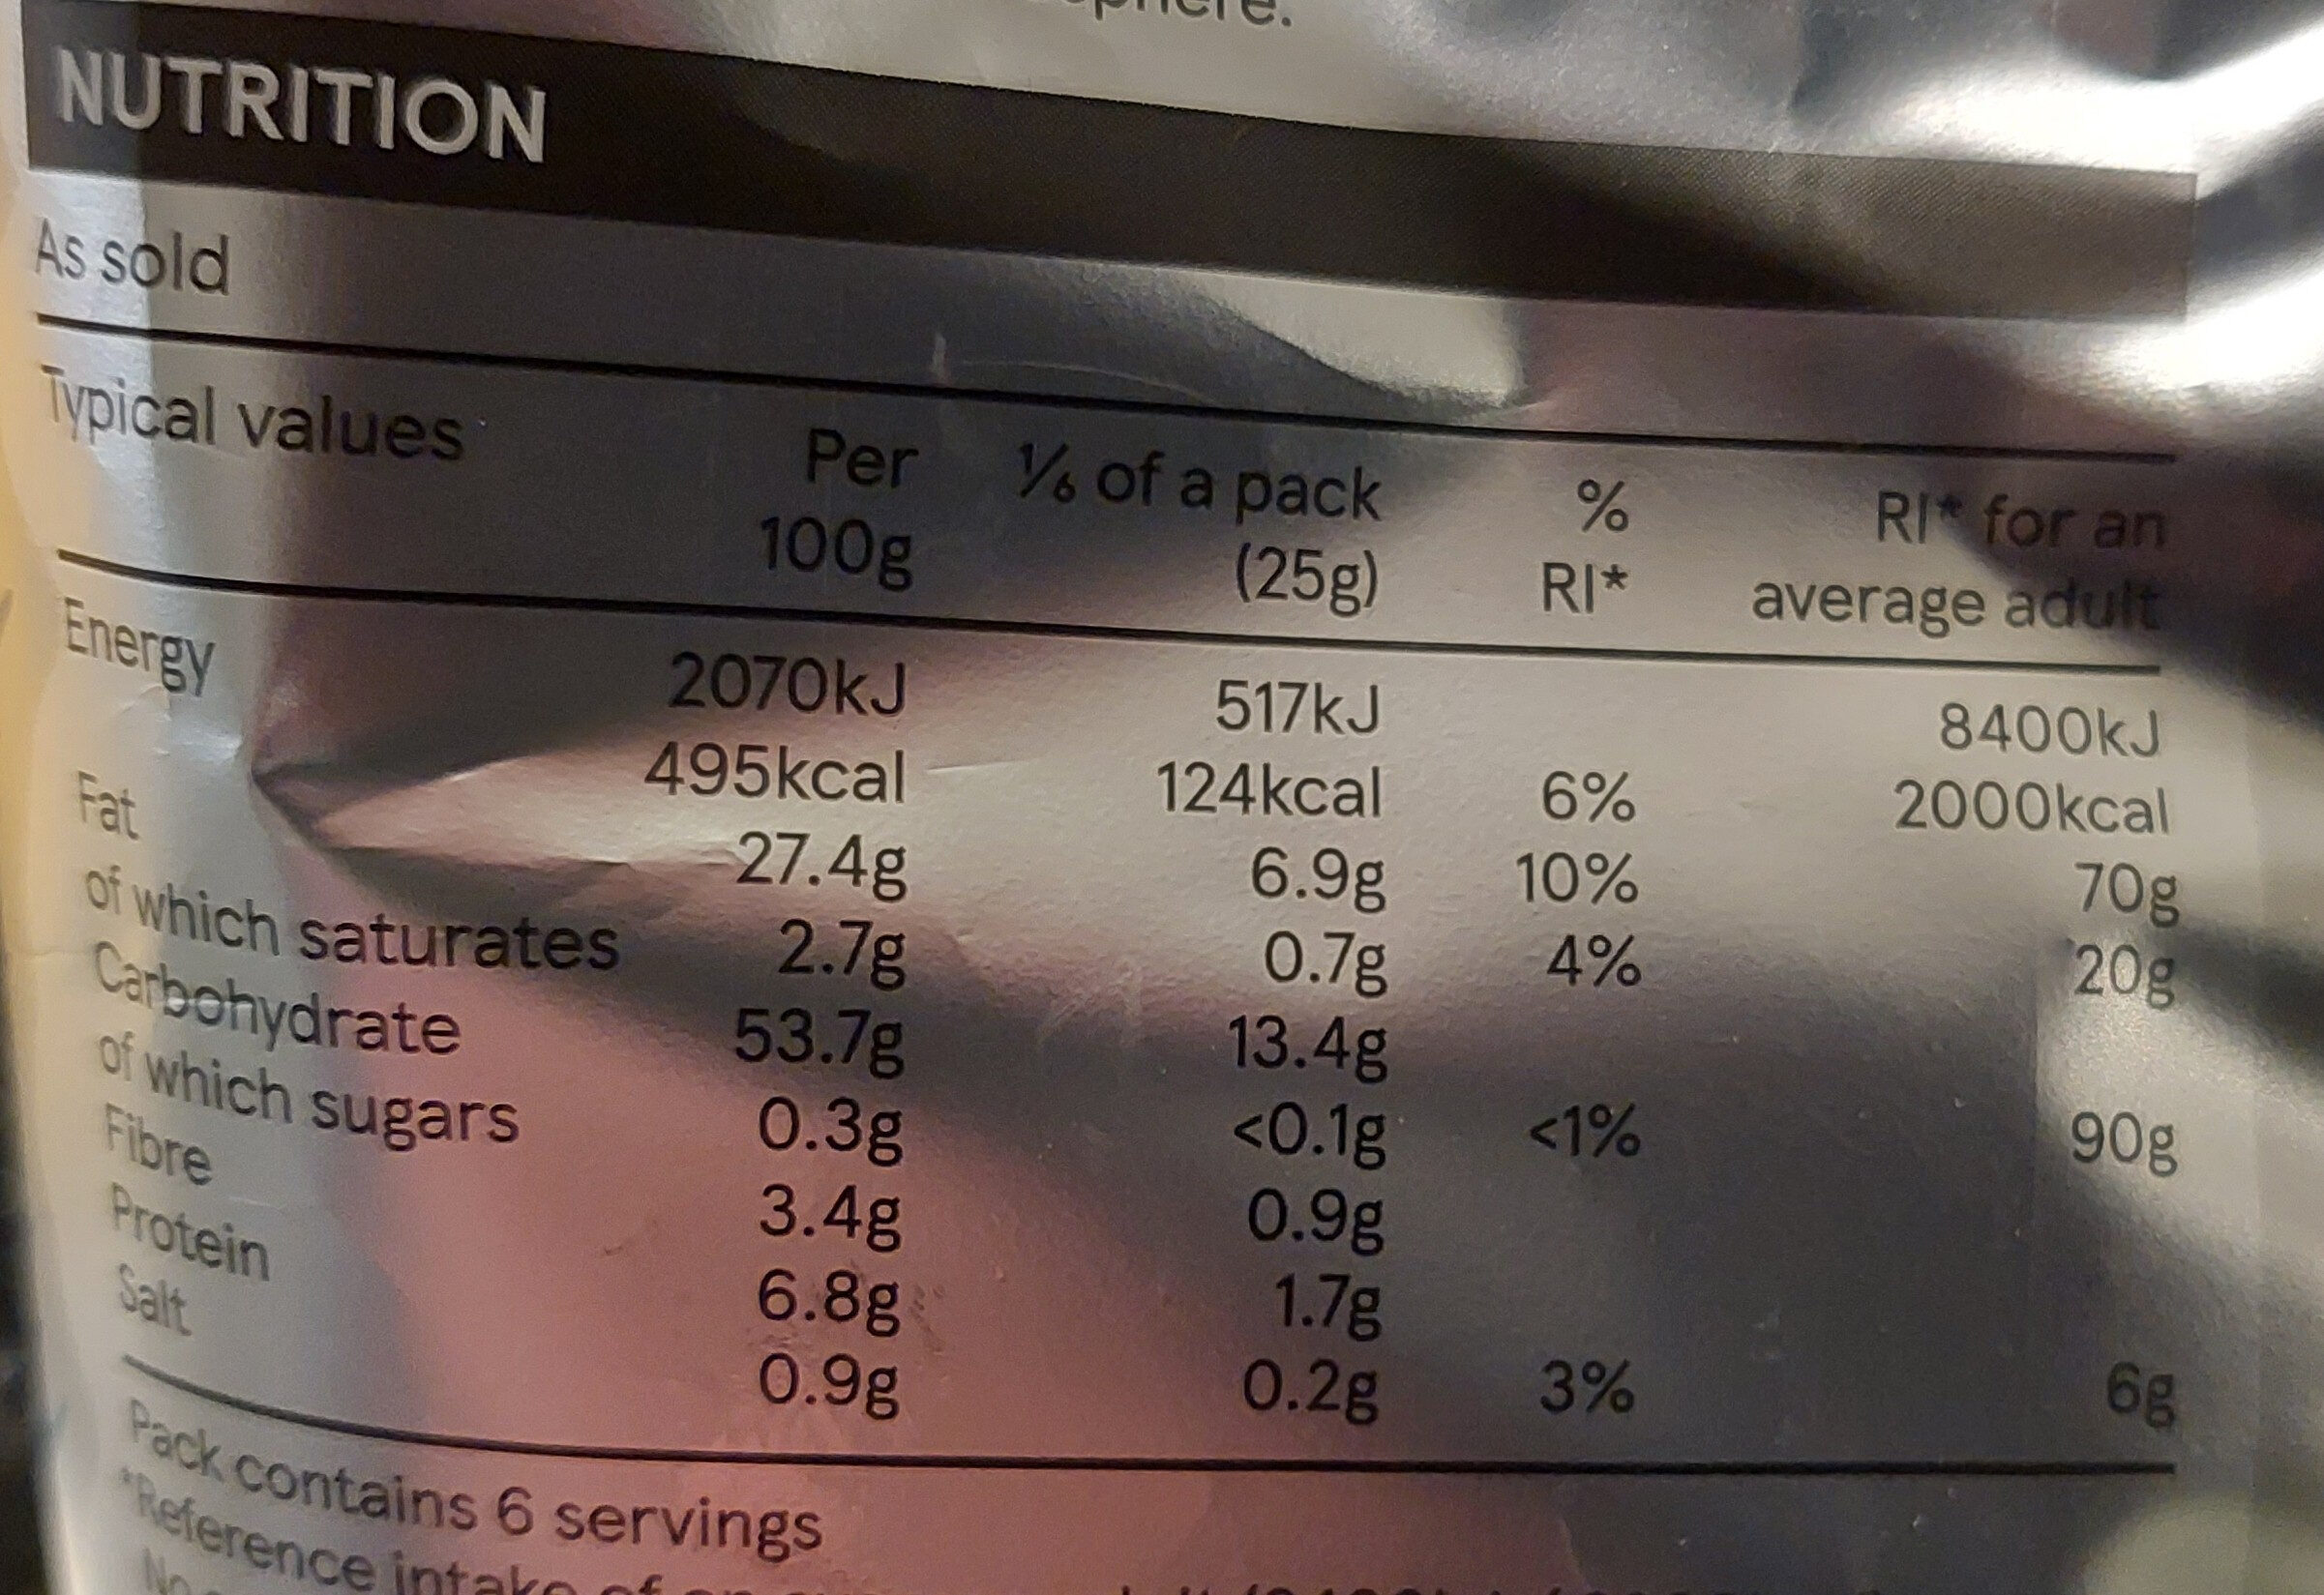 tesco finest ready salted crisps - Nutrition facts